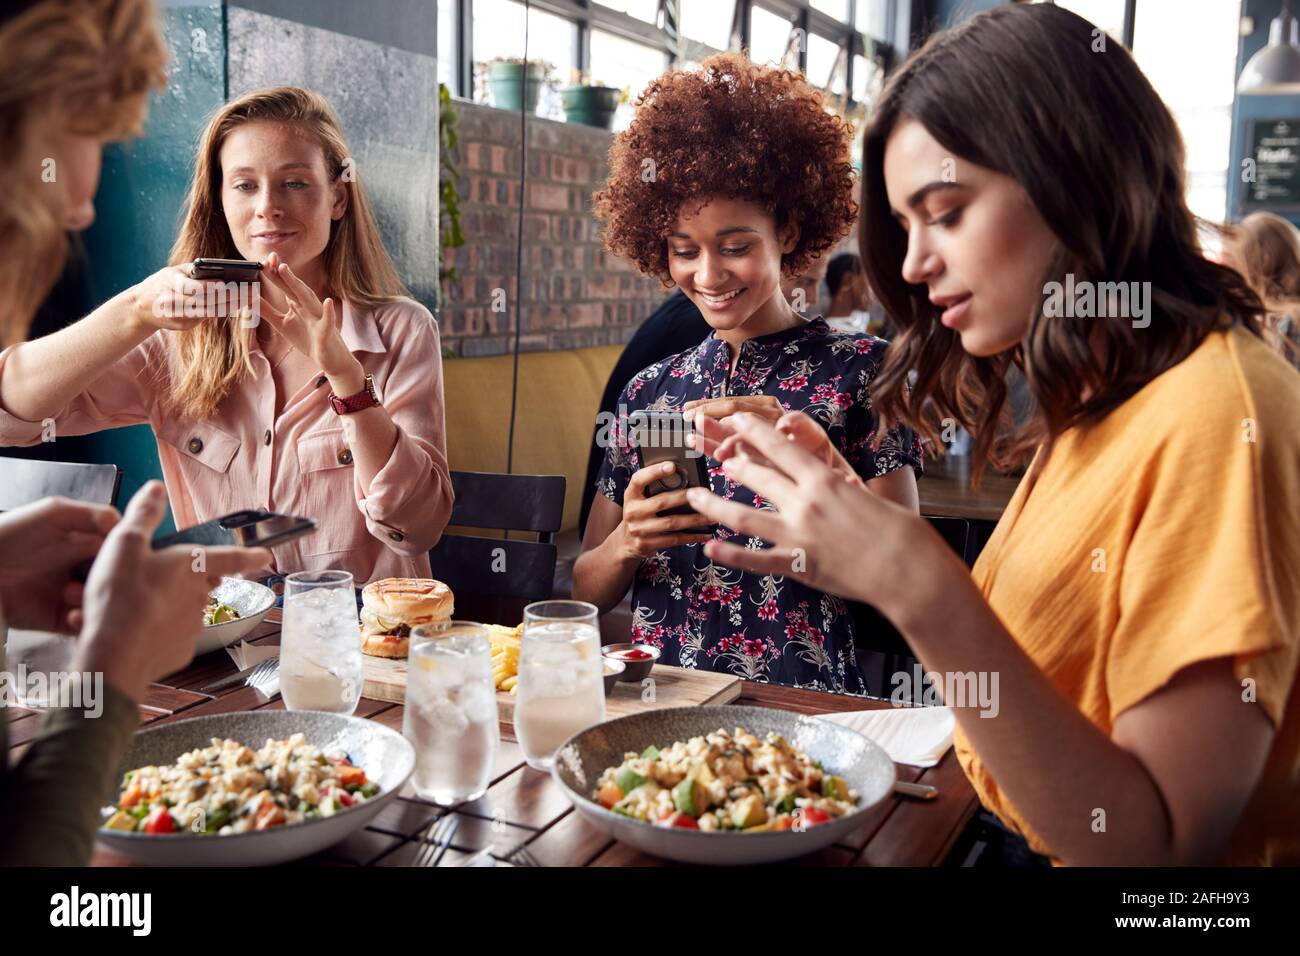 Female Friends In Restaurant Taking Picture Of Food In Restaurant To Post On Social Media Stock Photo